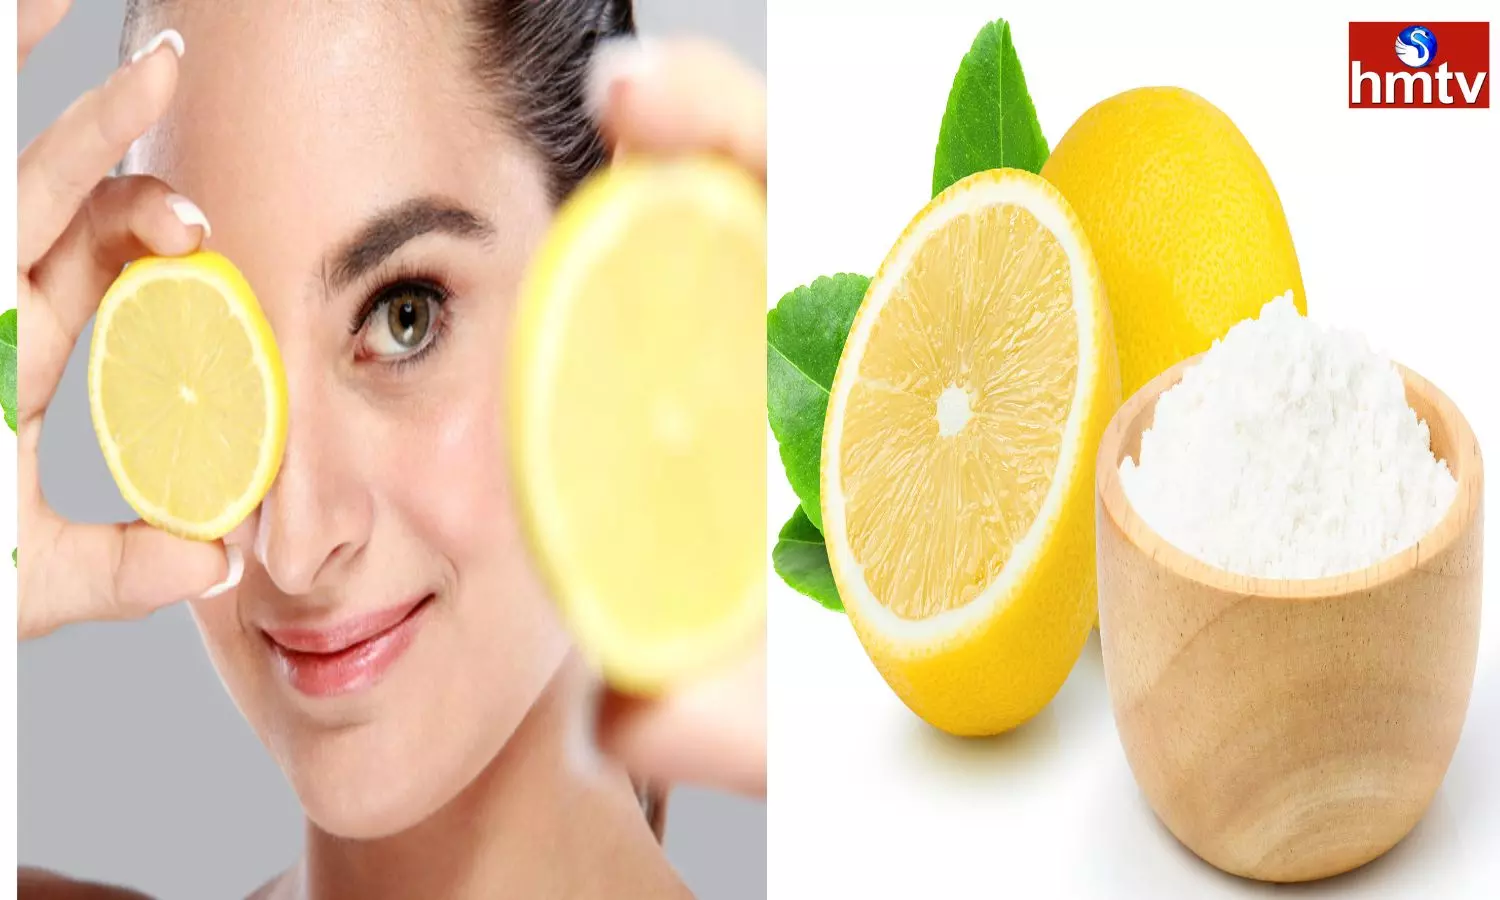 Applying Lemon and Salt on the Face will Make The Face Glow in 2 Days